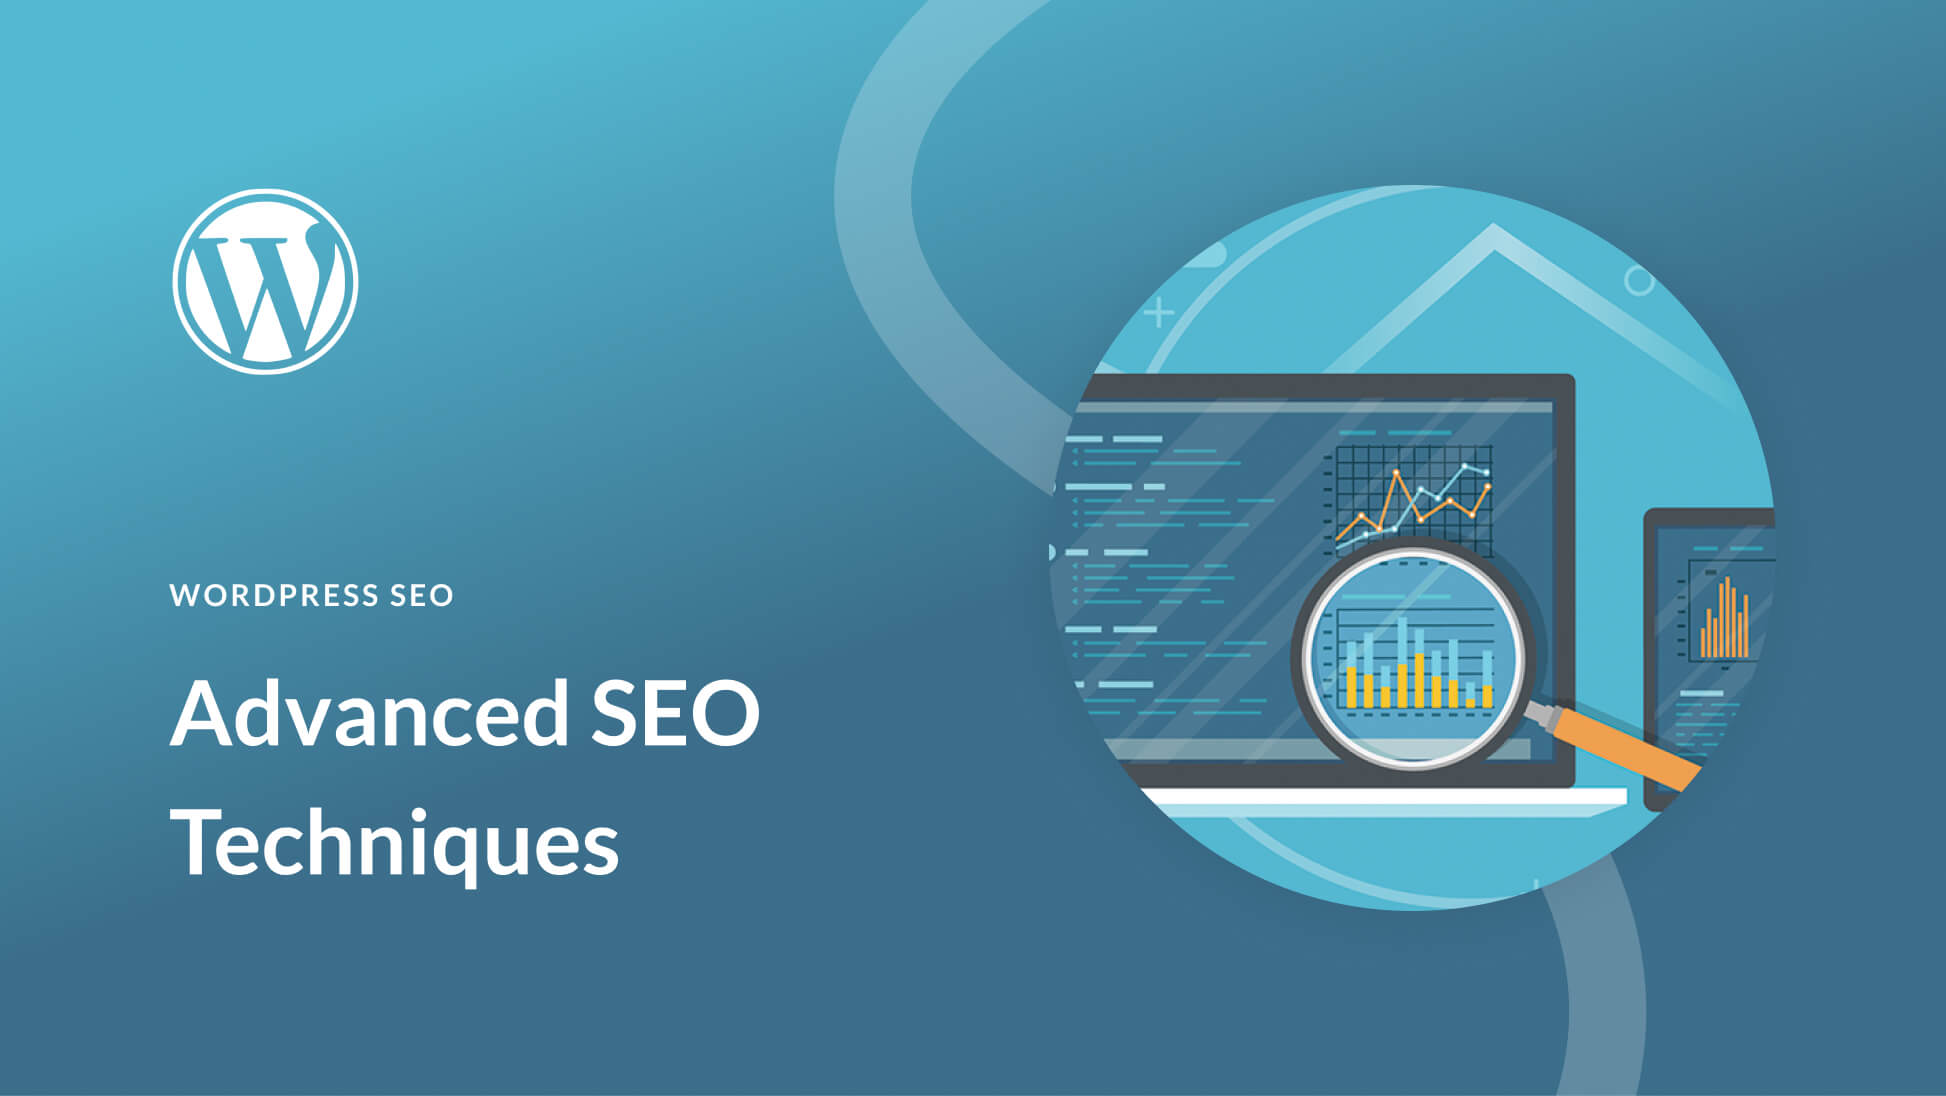 6 off-page SEO strategies for small businesses worth implementing